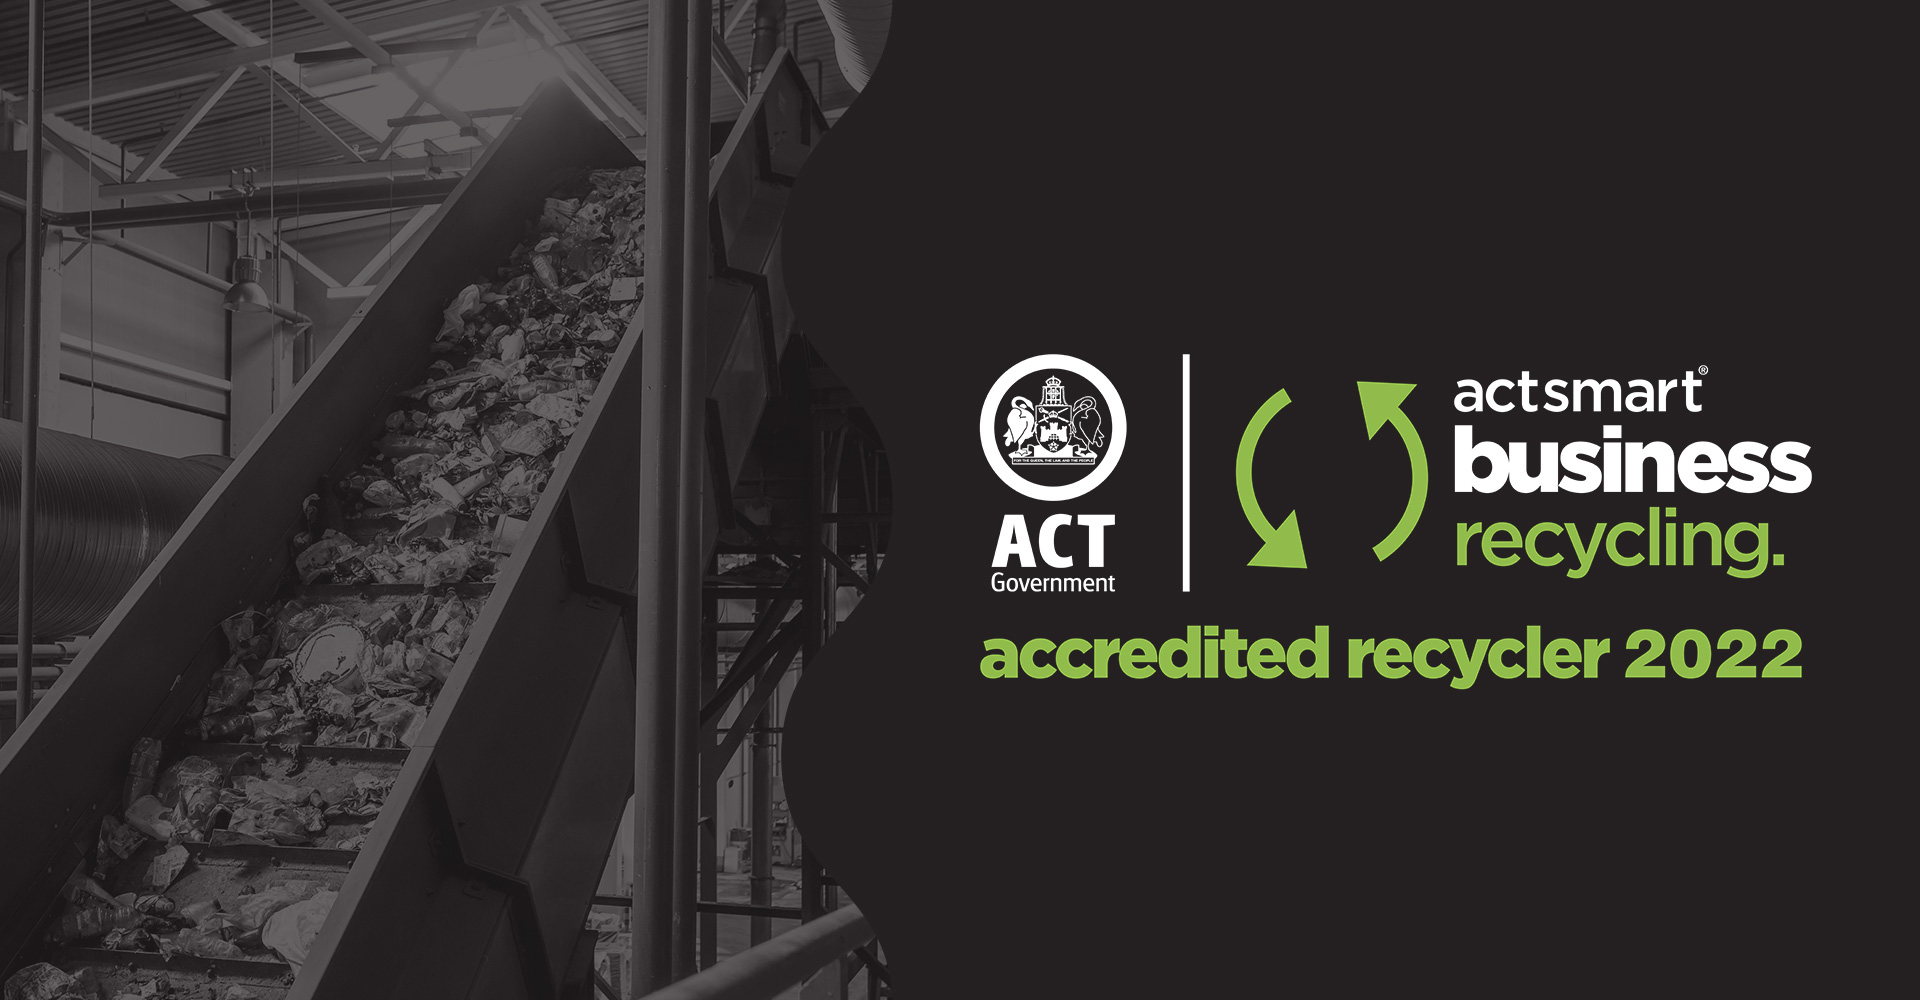 ACTsmart - Accredited Recycler